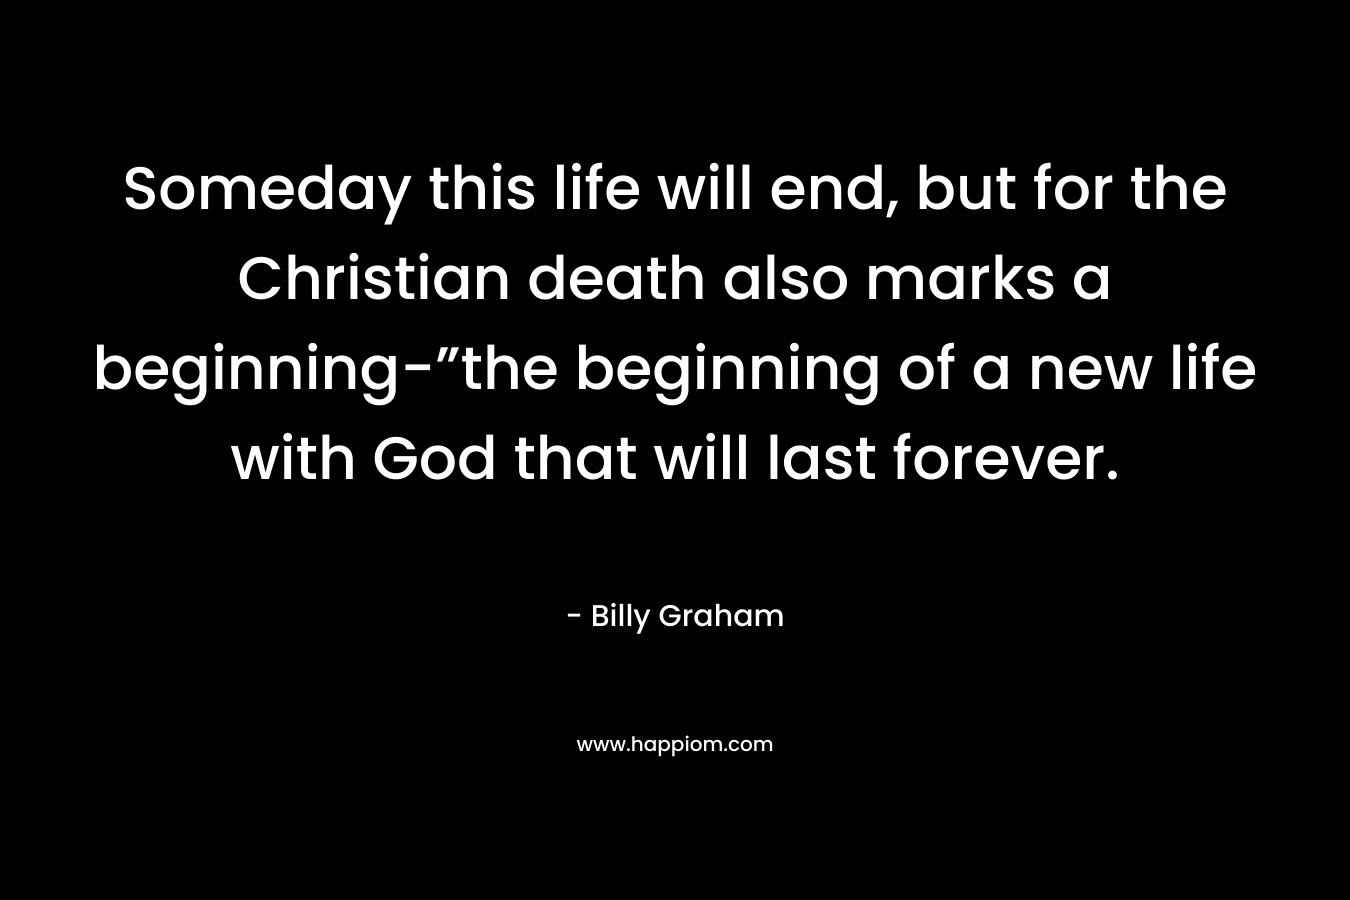 Someday this life will end, but for the Christian death also marks a beginning-”the beginning of a new life with God that will last forever. – Billy Graham